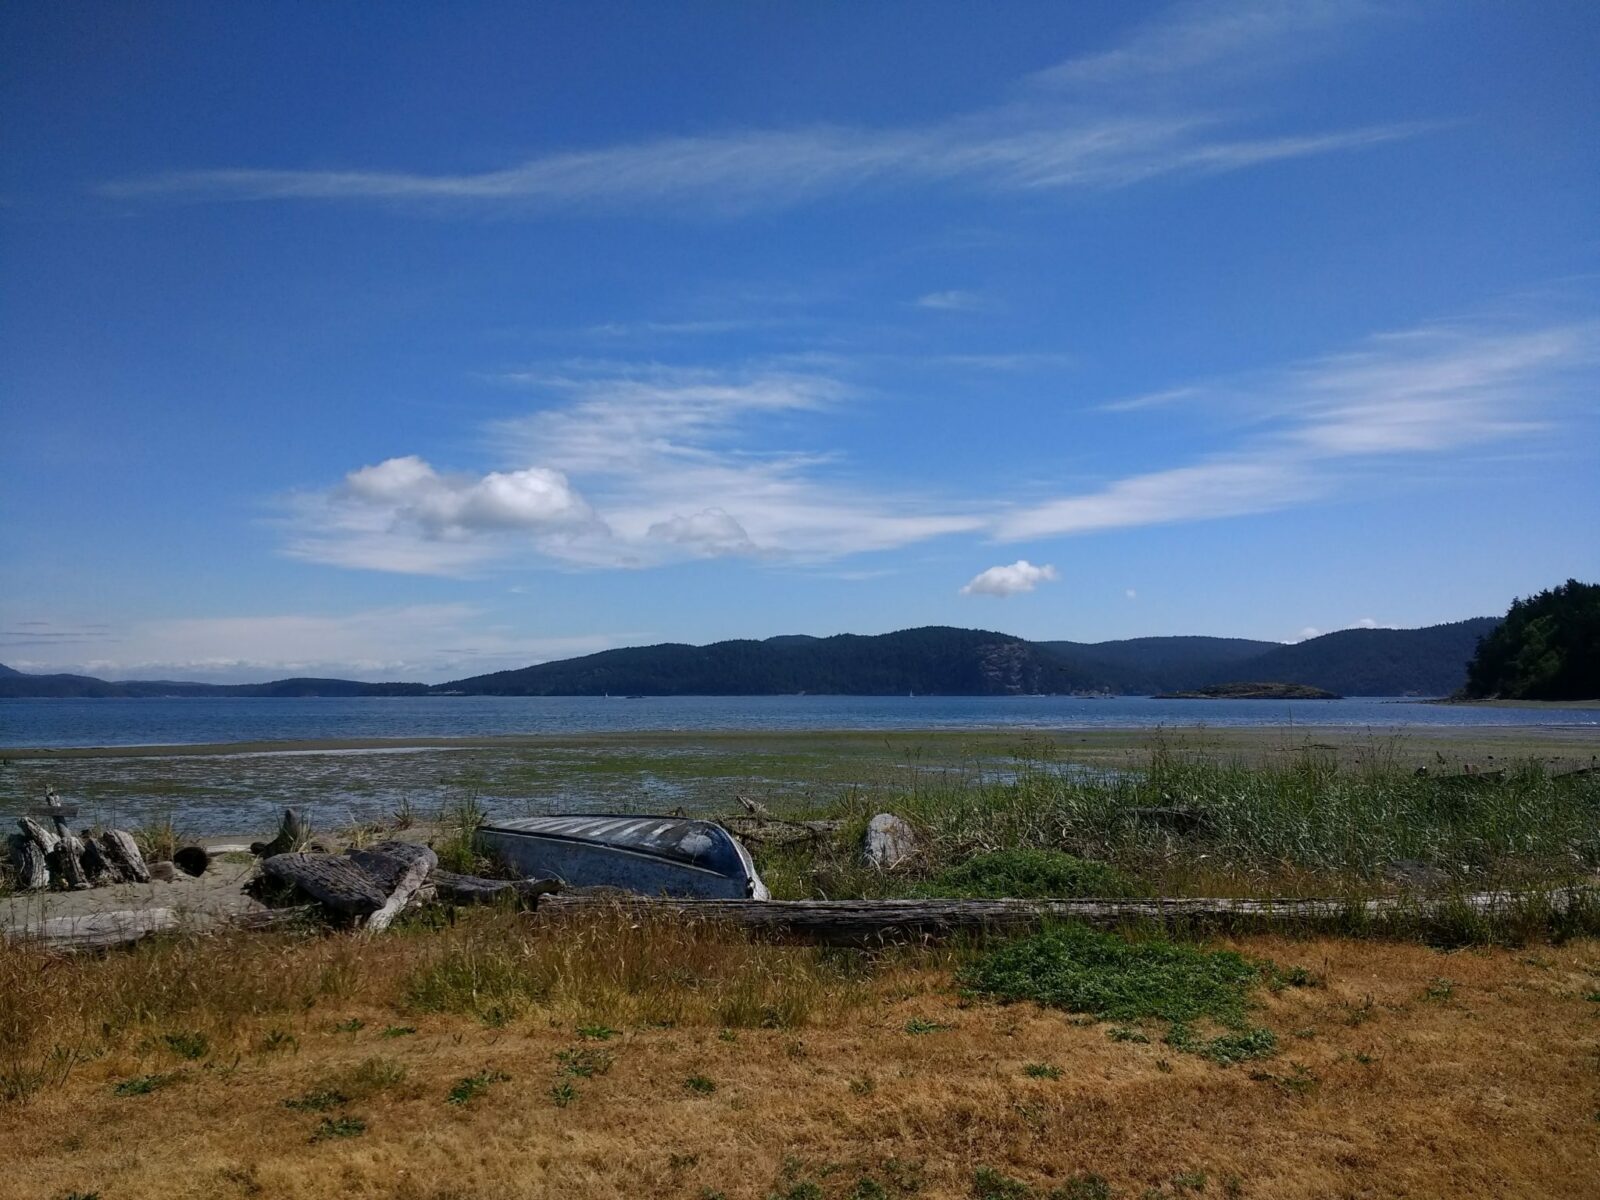 Lopez Island bike camping at Spencer Spit State Park. There is a grassy spit in the foreground wtih a canoe, tideflats and water behind. Forested islands are in the background on a sunny day